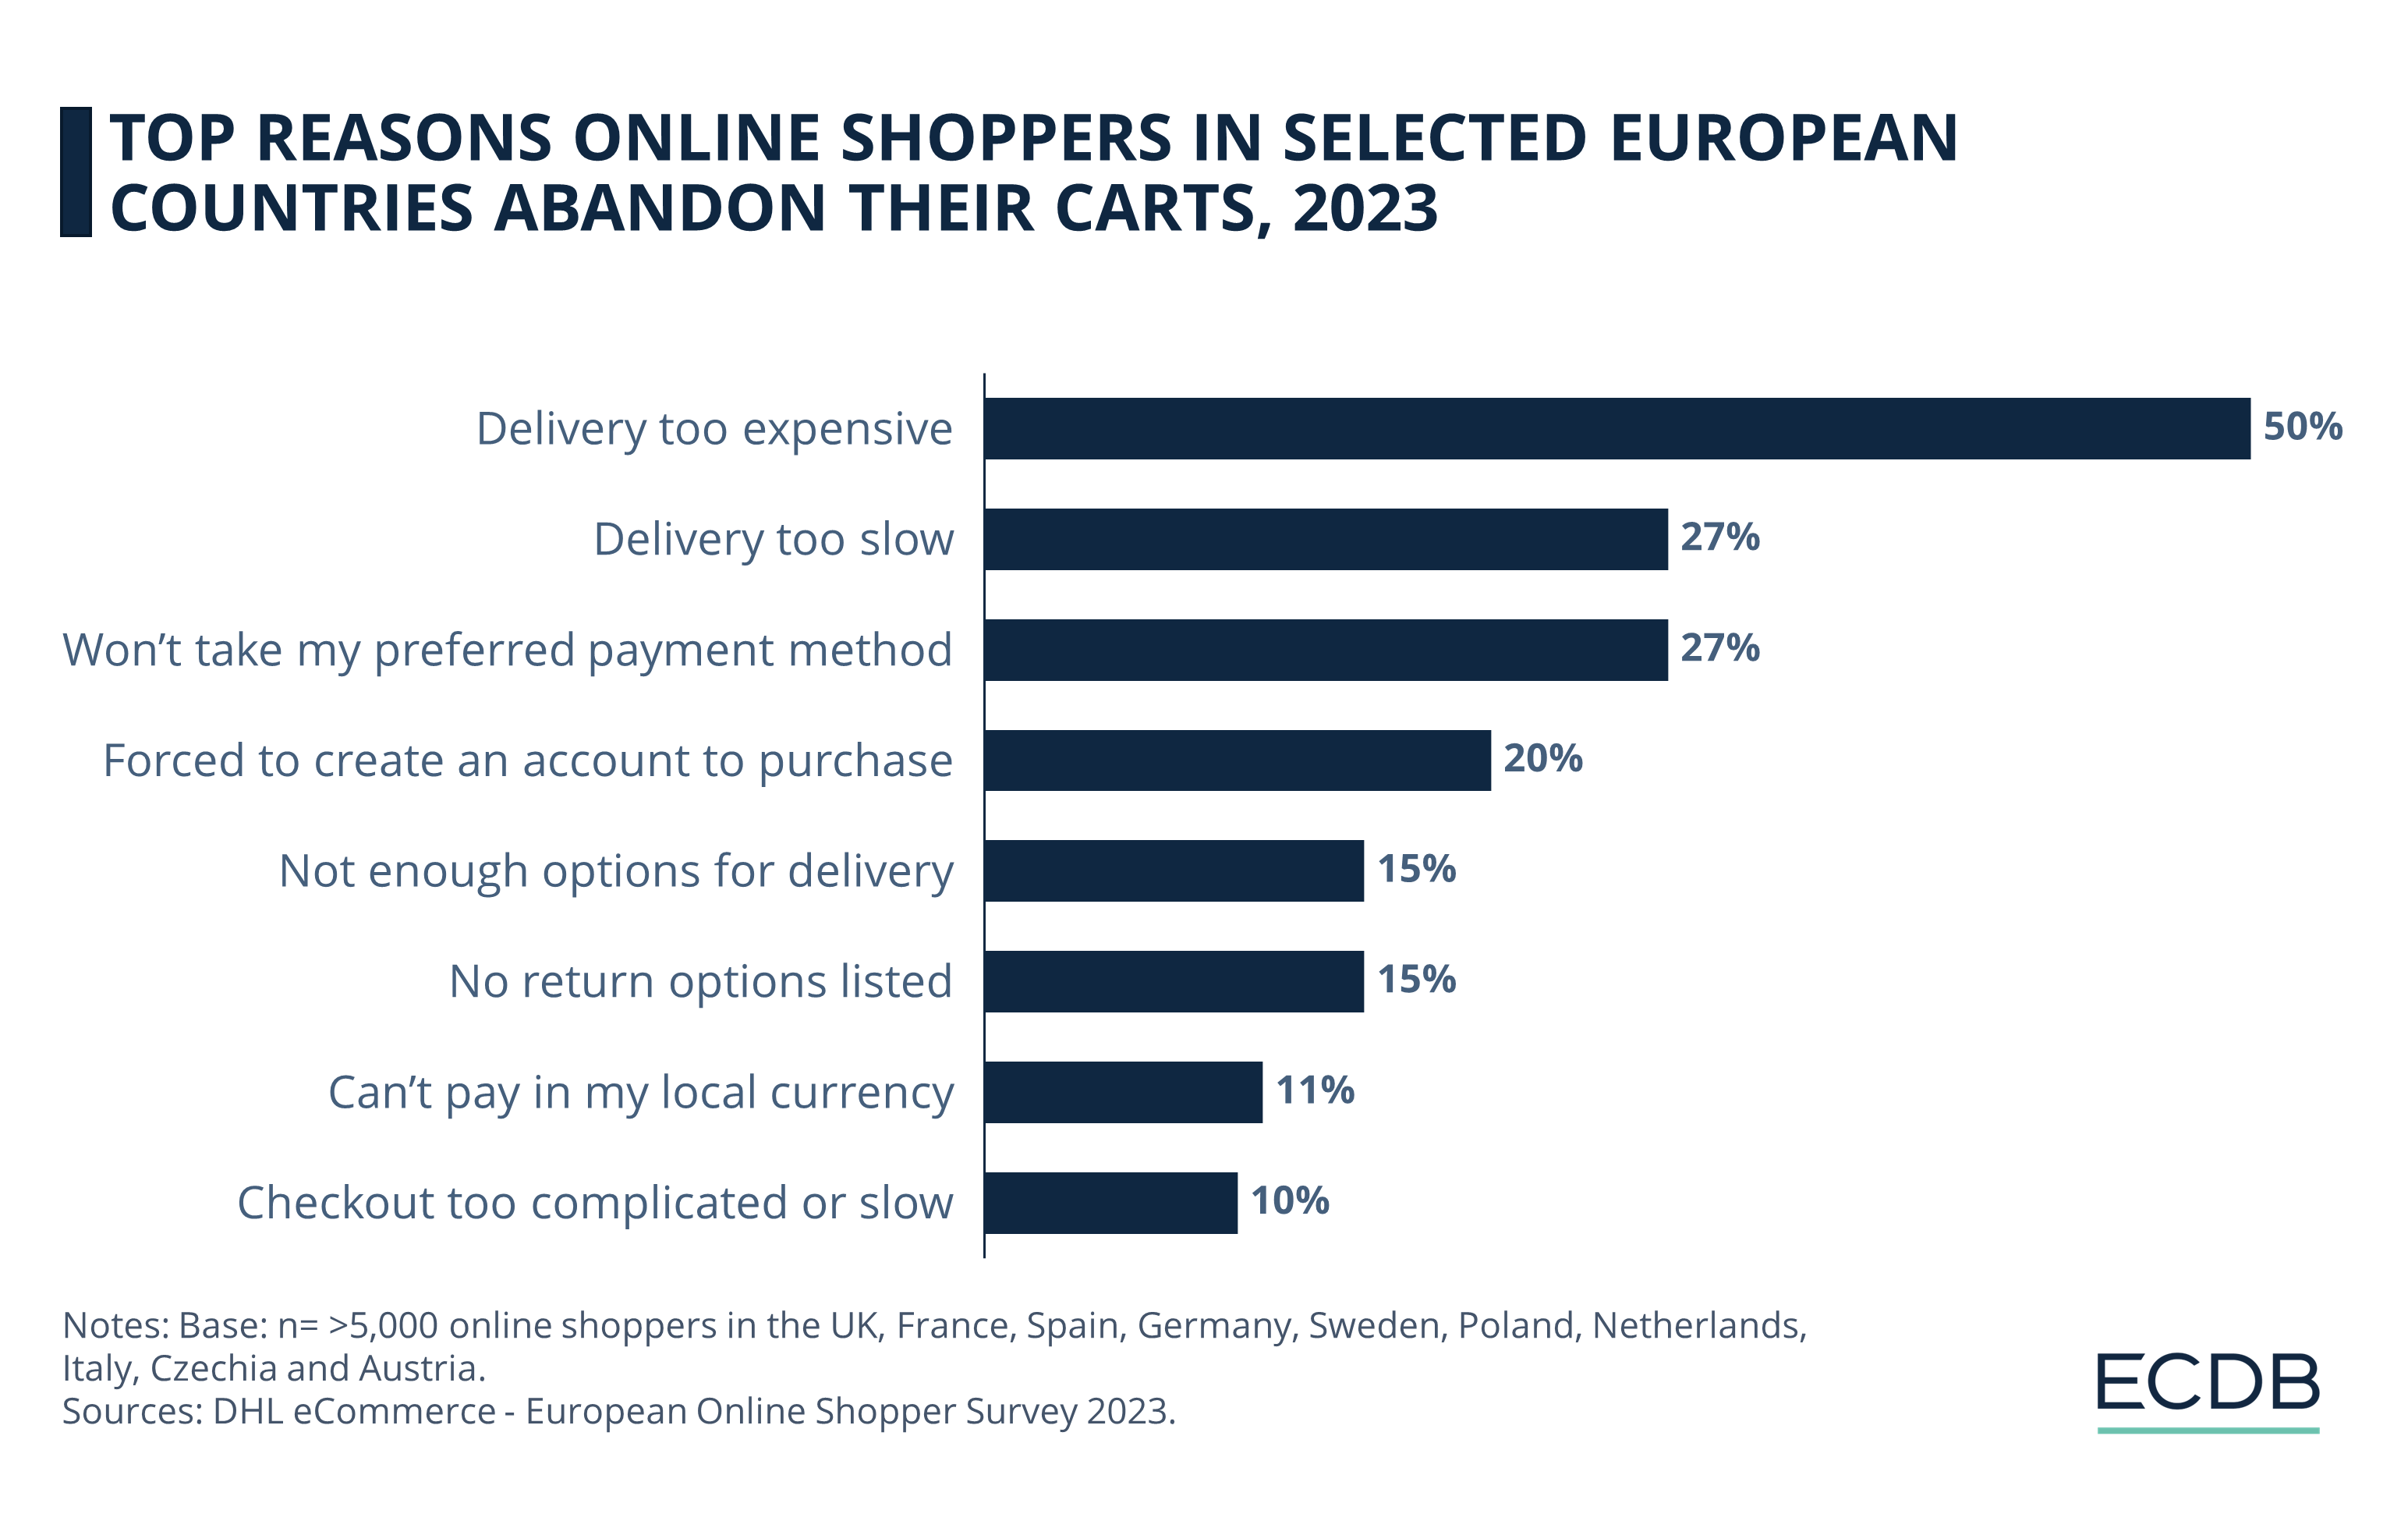 Top Reasons Online Shoppers in Selected European Countries Abandon Their Carts, 2023